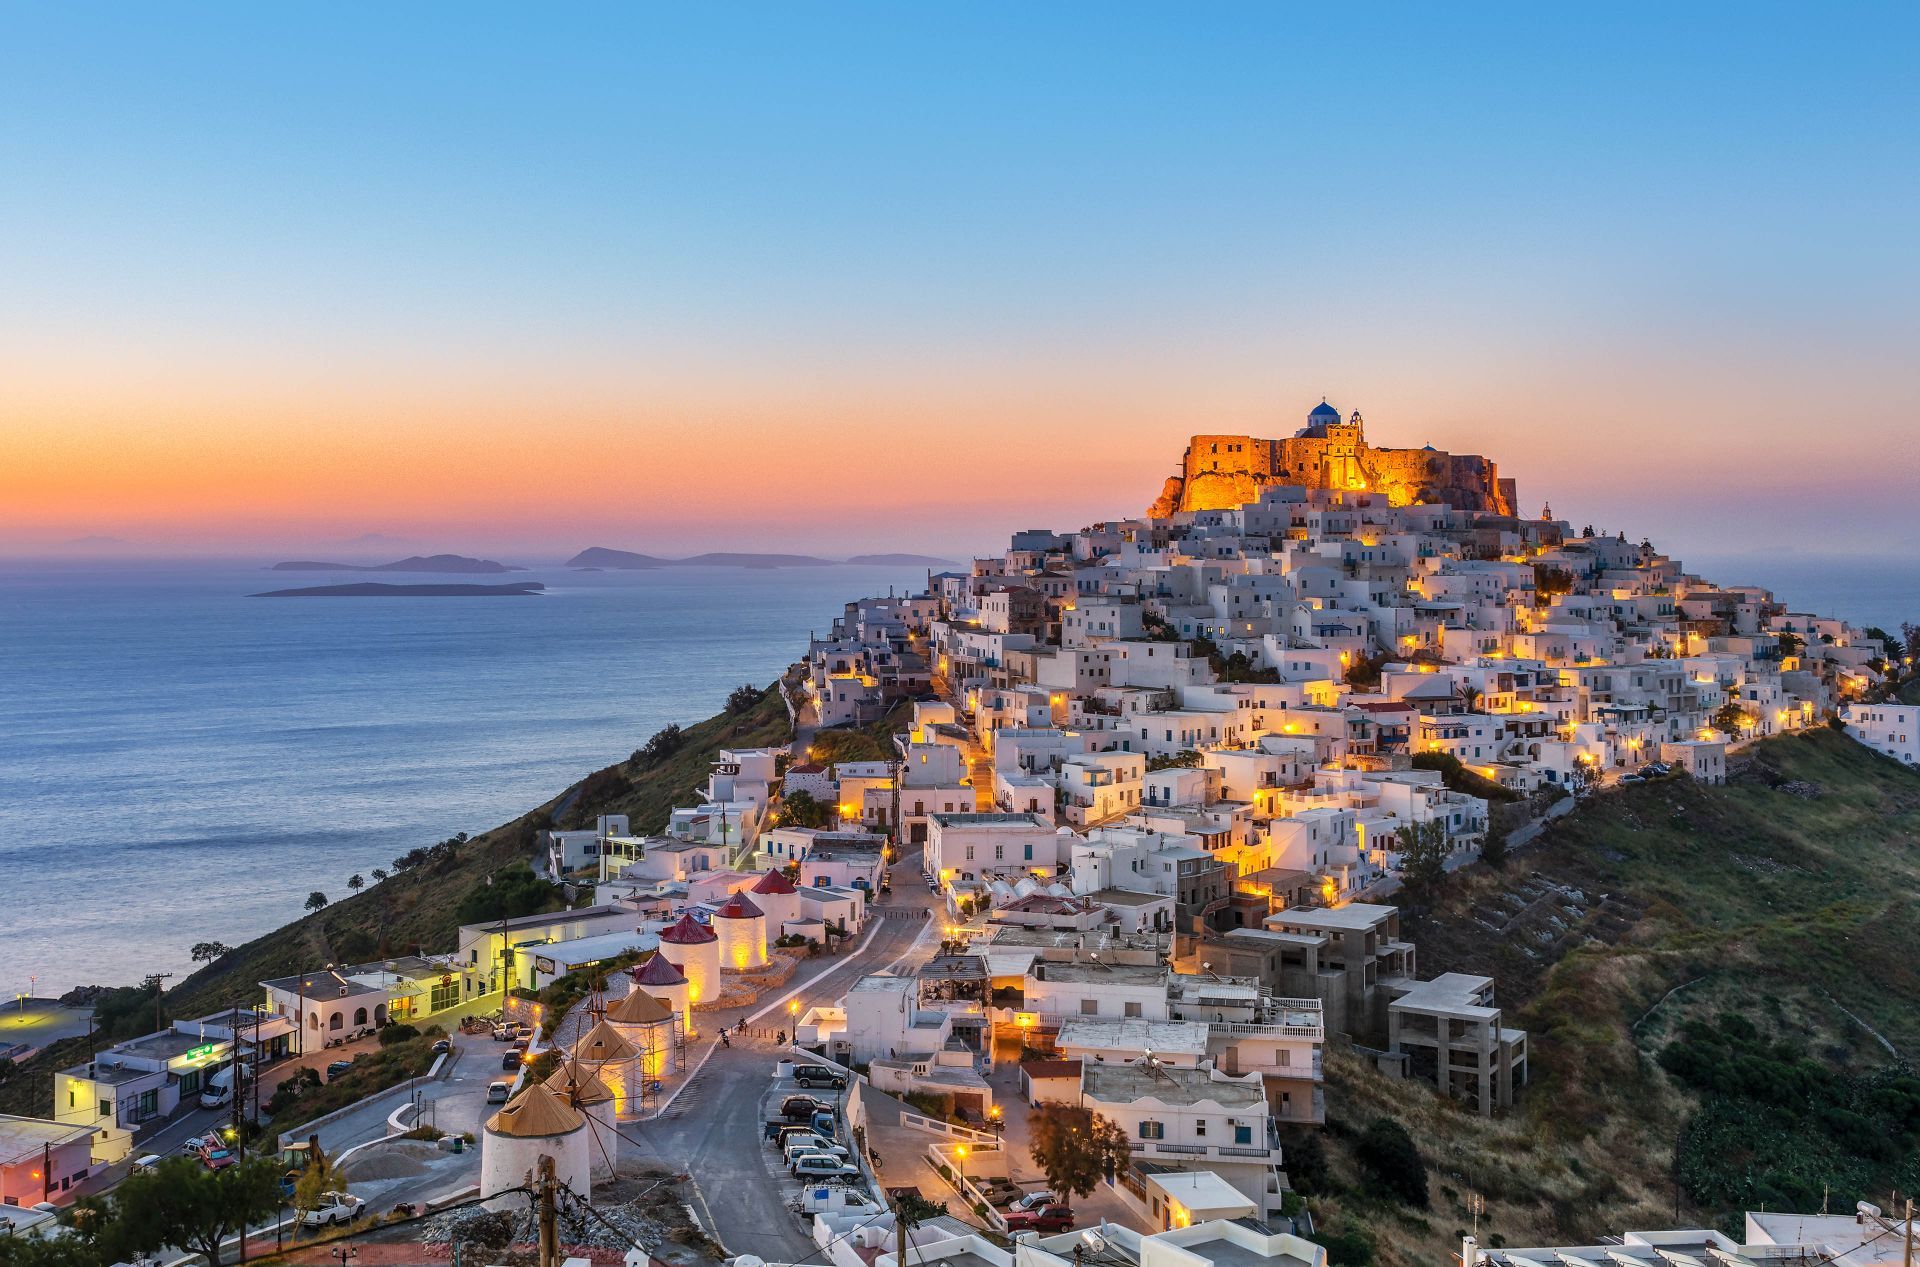 Dodecanese islands: Chora, the main town of Astypalea island